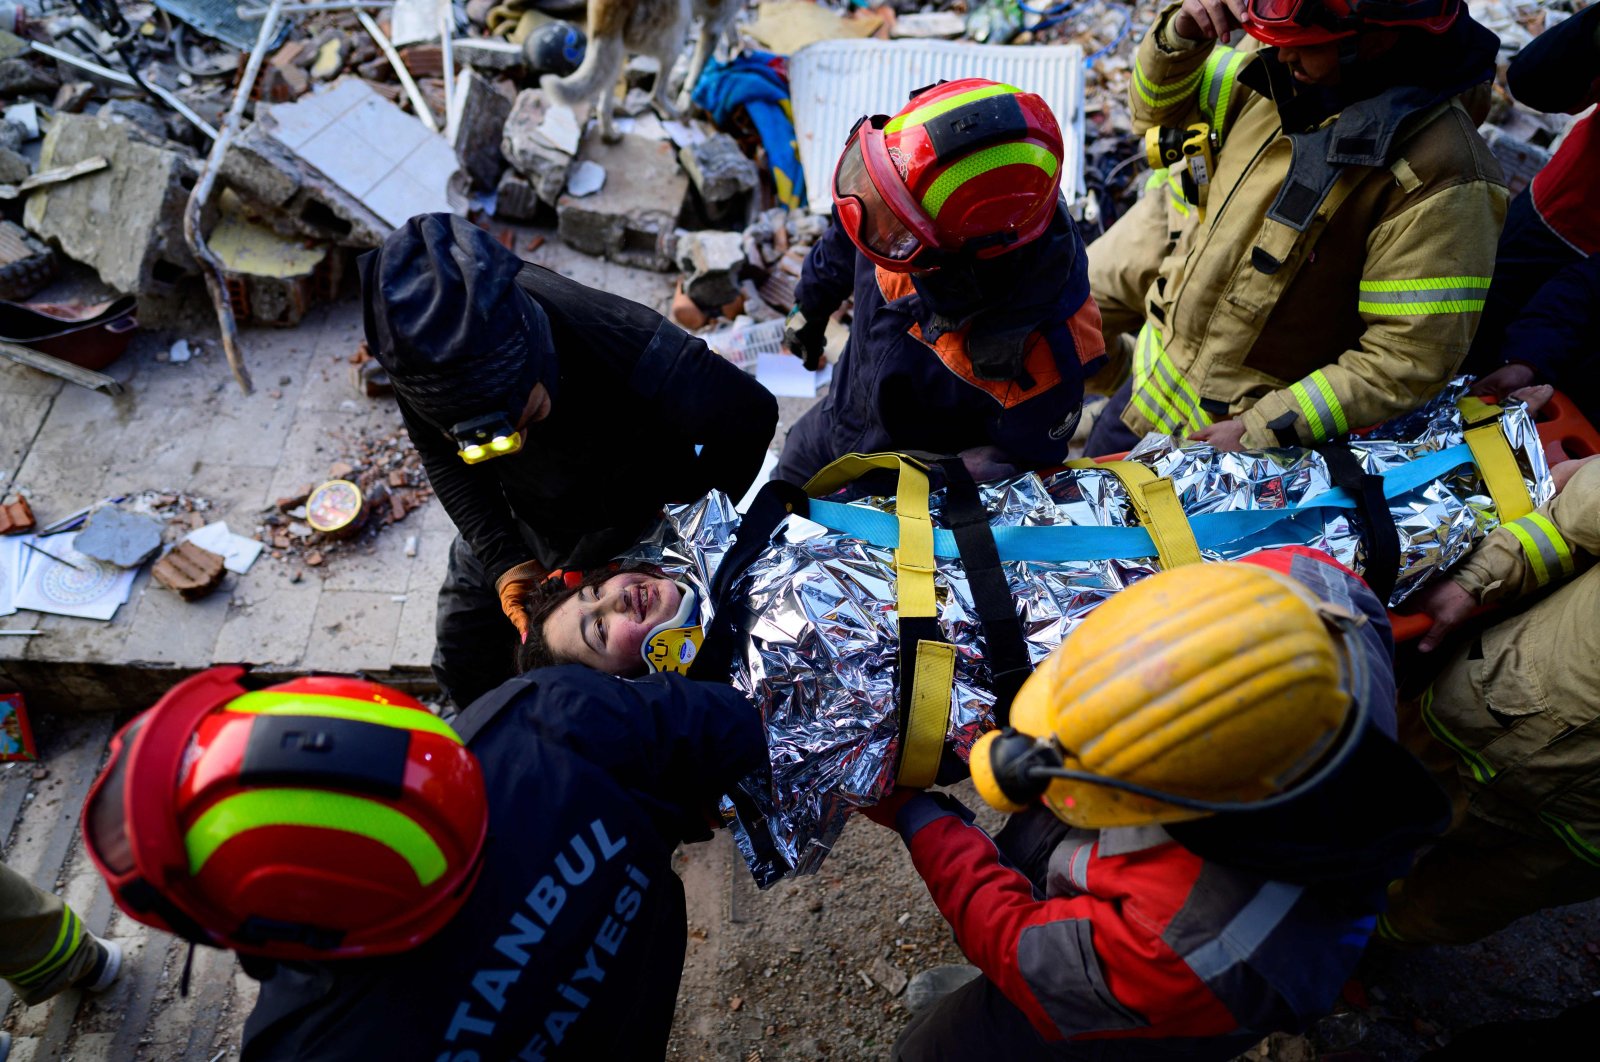 Rescuers evacuate a 12-year-old girl, Cudi, from the rubble, in Hatay, southern Türkiye, Feb. 12, 2023. (AFP Photo)